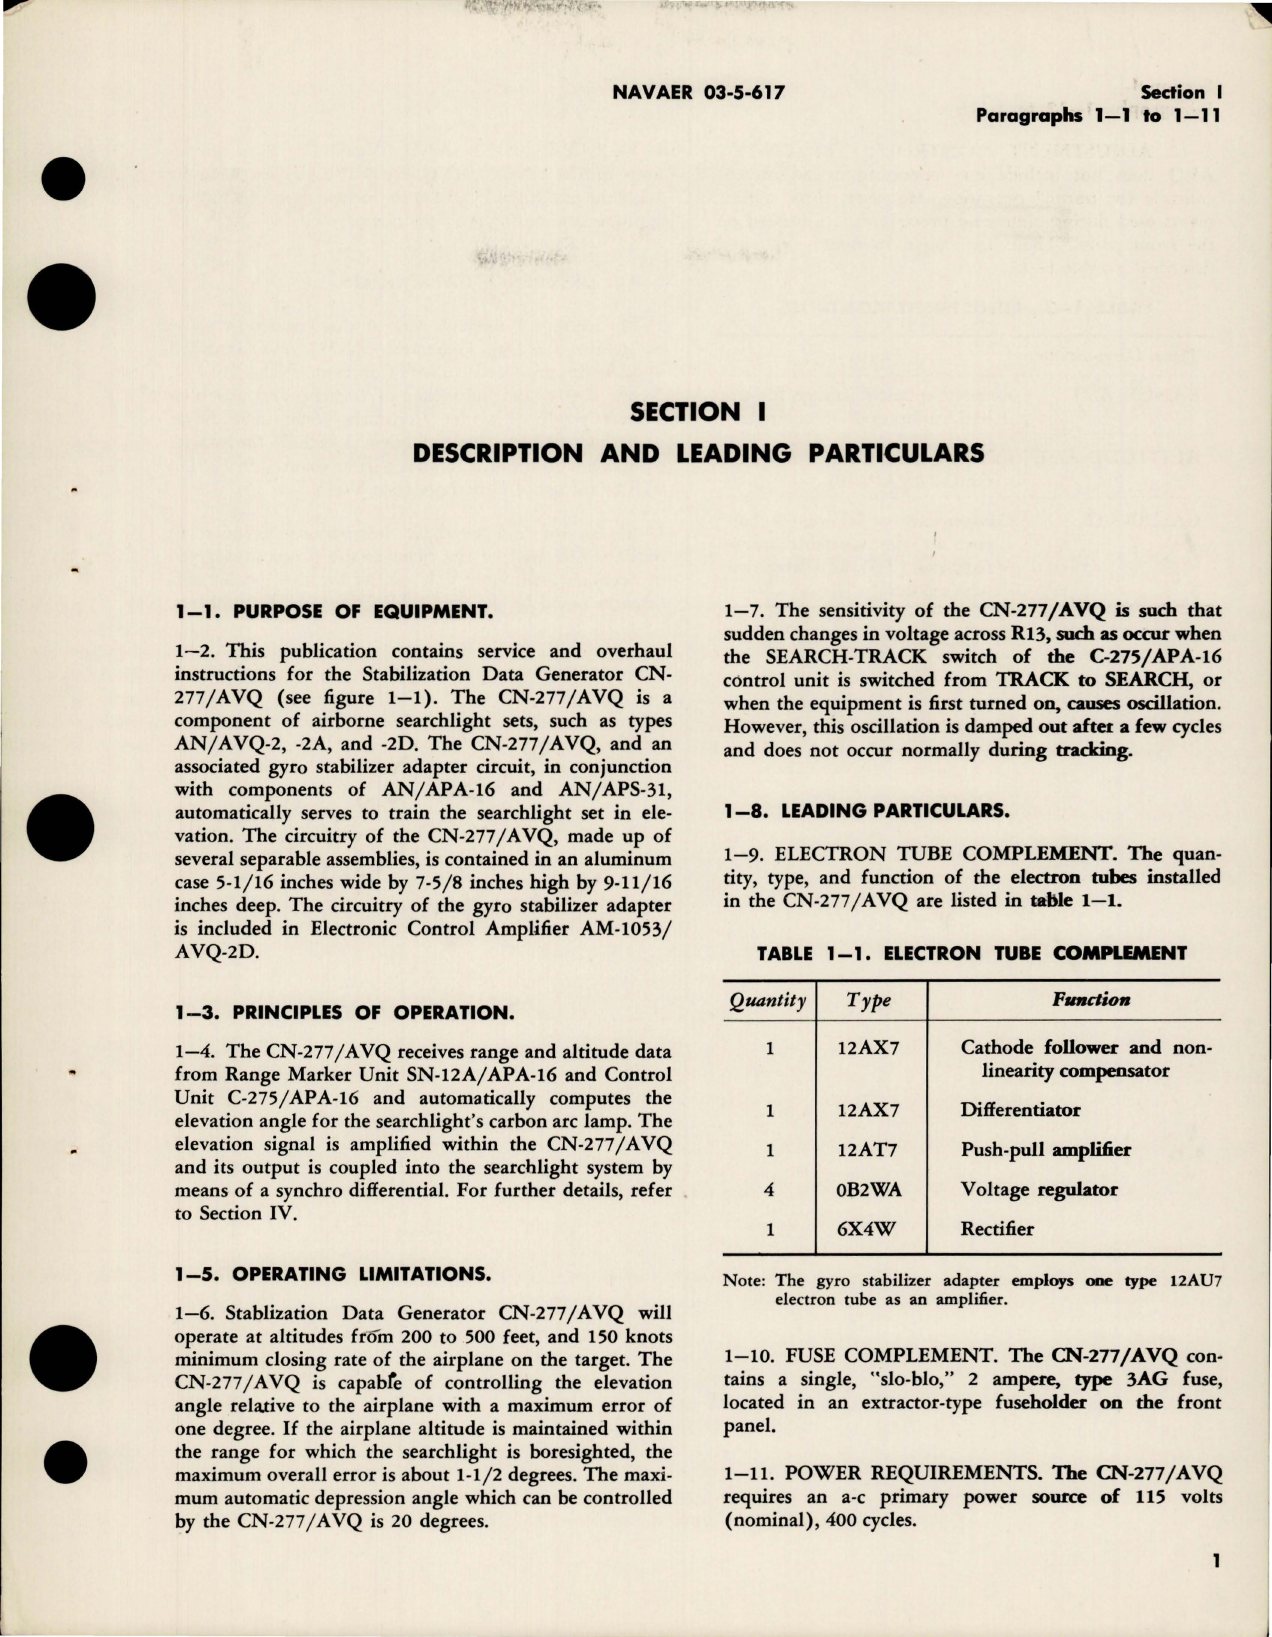 Sample page 7 from AirCorps Library document: Service and Overhaul Instructions for Stabilization Data Generator CN-277-AVQ